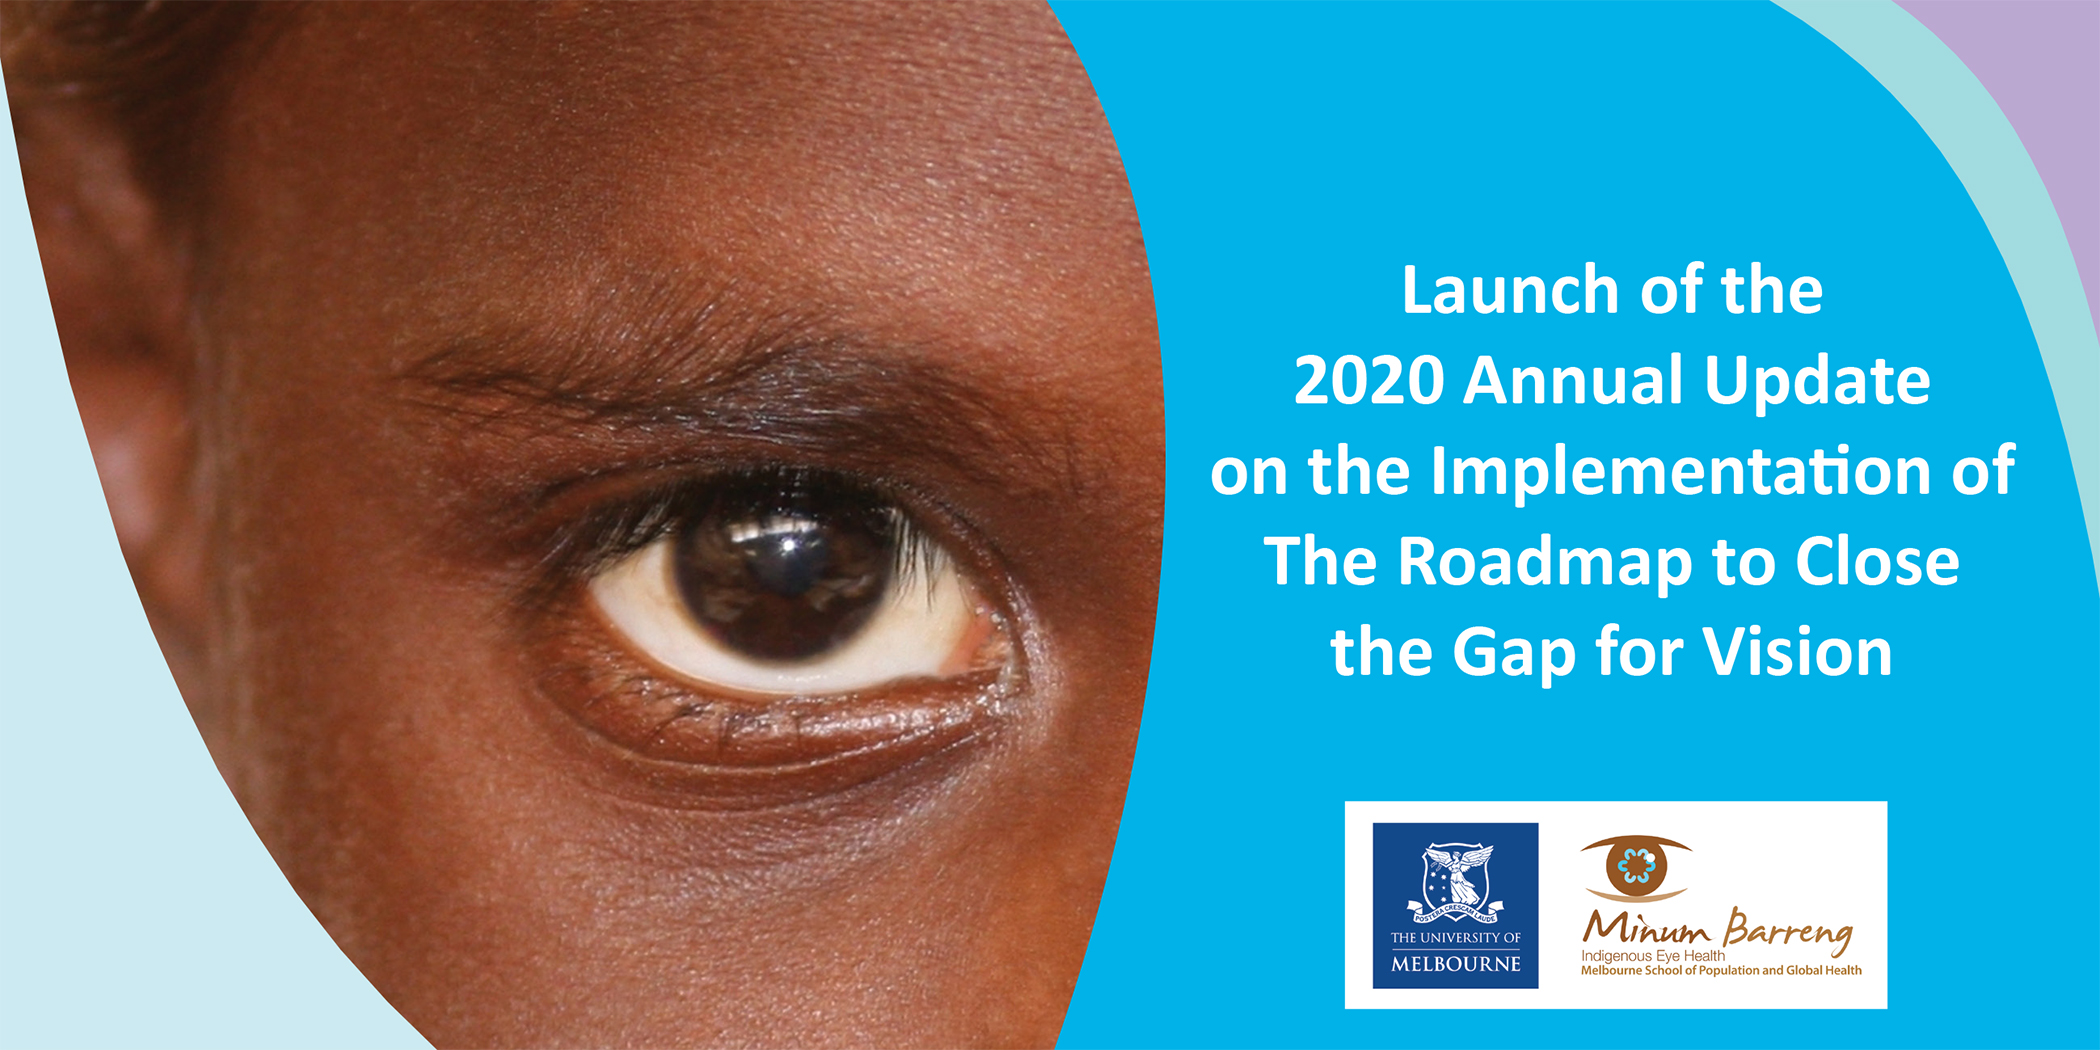 launch of the 2020 Annual Update on the Implementation of The Roadmap to Close the Gap for Vision- invitation.